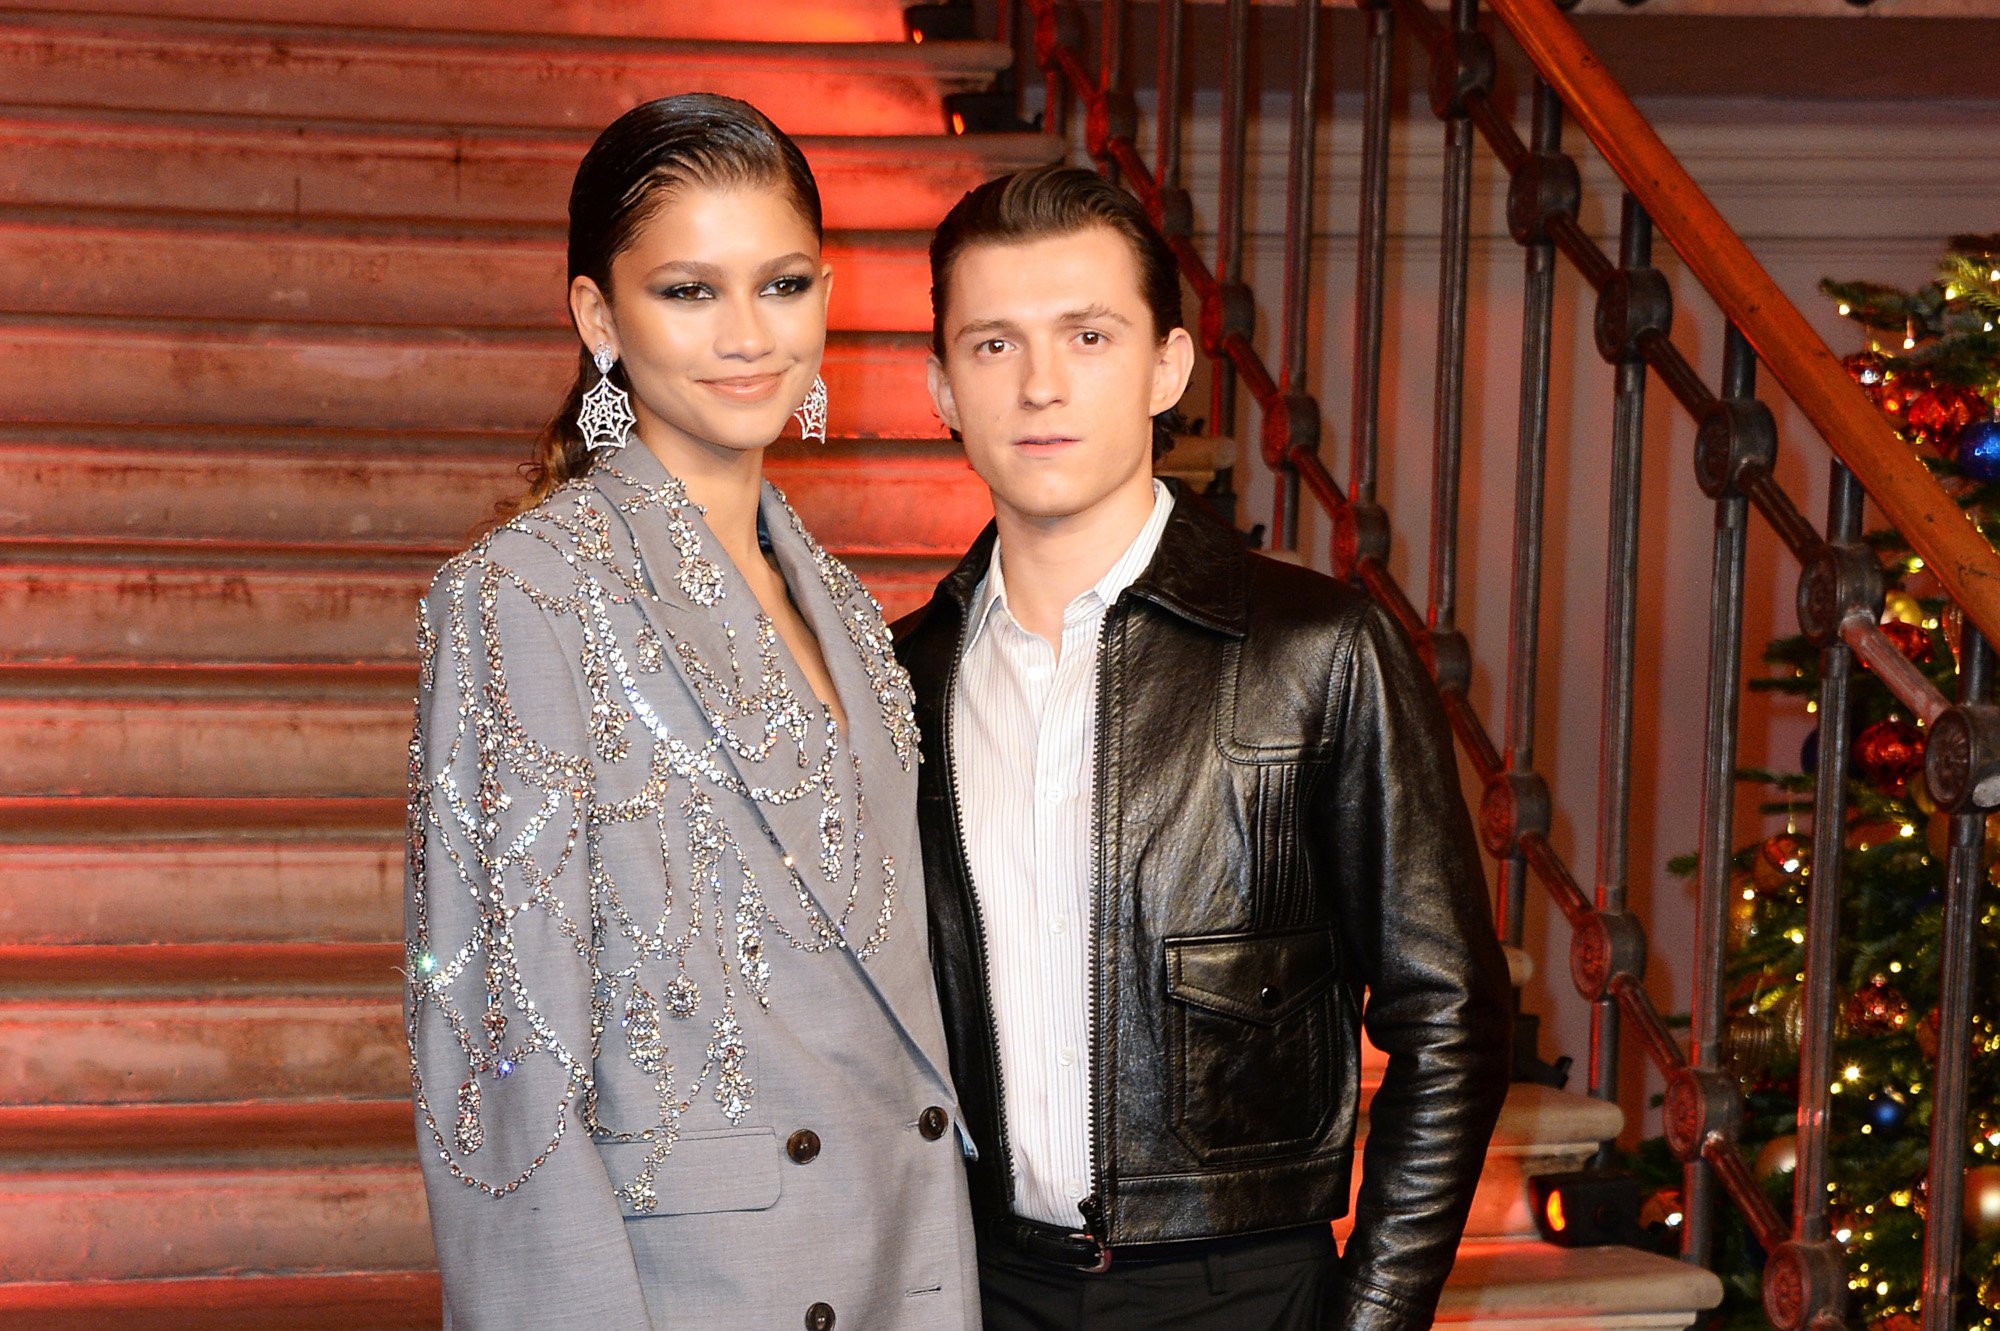 Zendaya and Tom Holland attend the photocall for 'Spider-Man: No Way Home.' She's wearing a grey blazer, and he's wearing a white T-shirt and leather jacket.